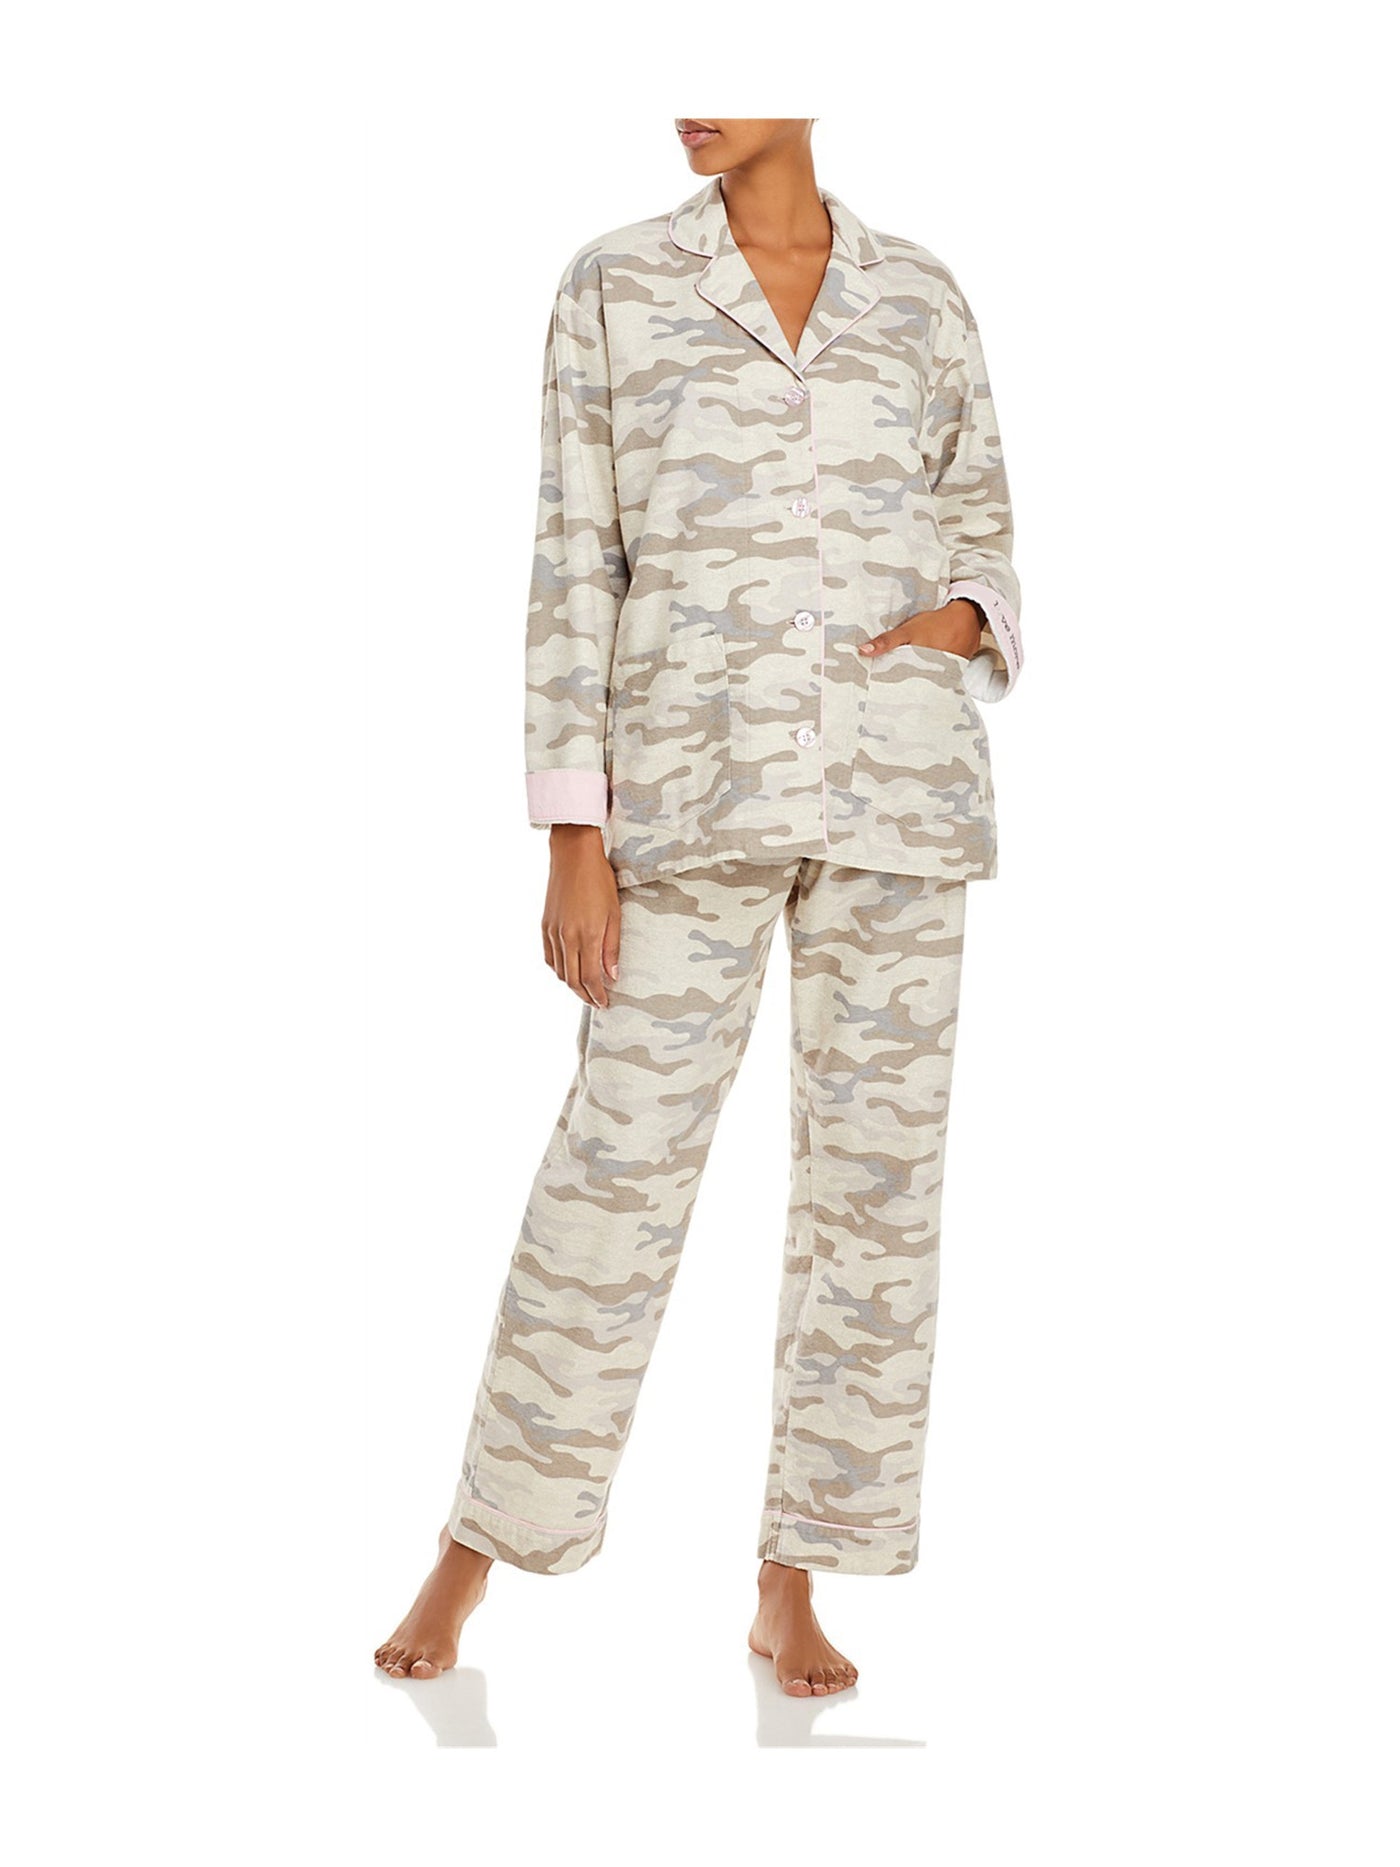 P.J.SALVAGE Womens Beige Camouflage Pocketed Long Sleeve Button Up Top Straight leg Pants Pajamas XS